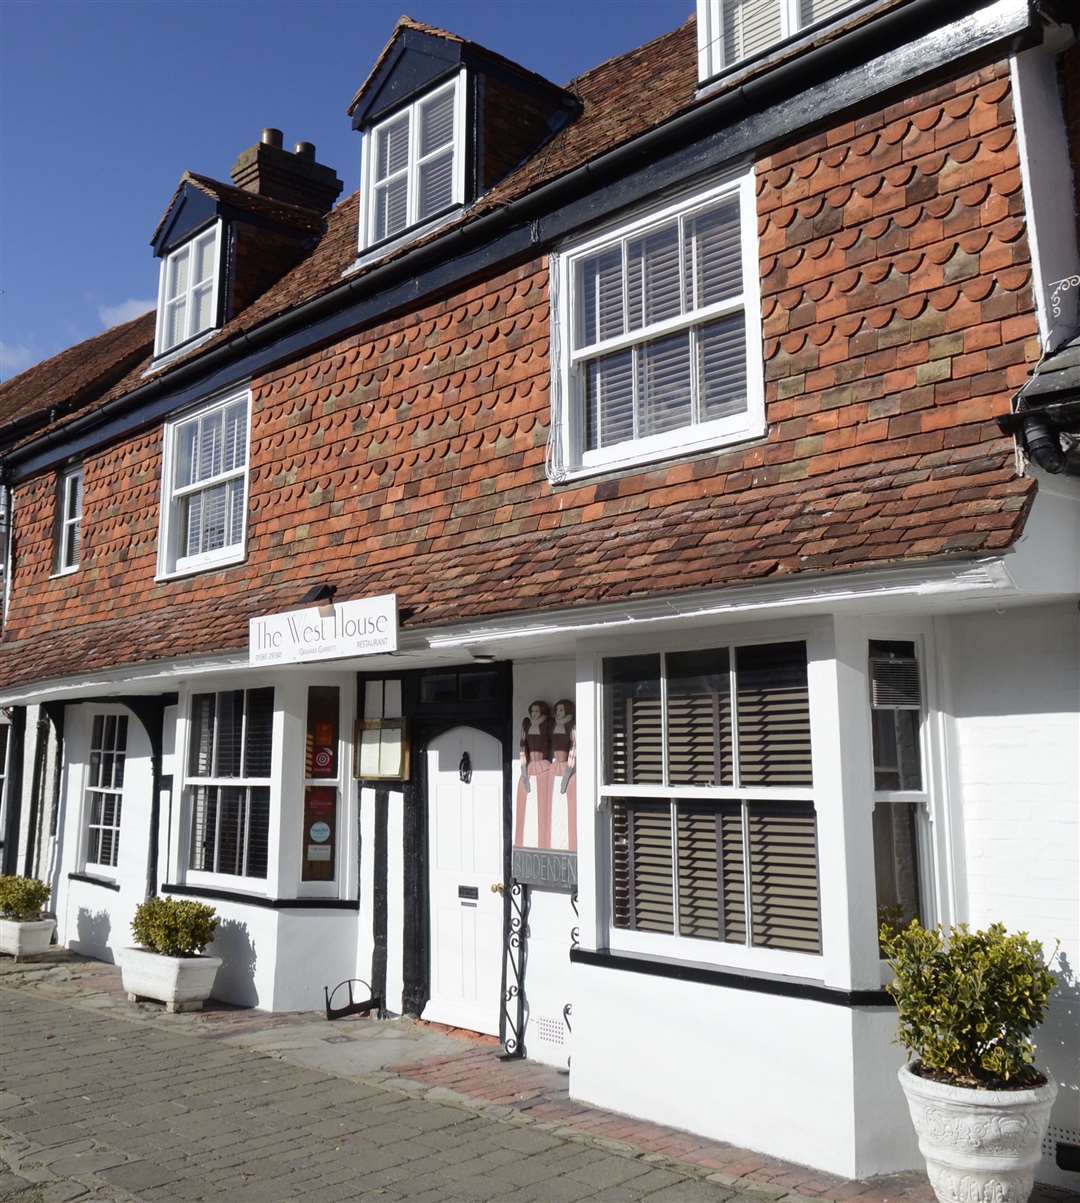 The West House in Biddenden was voted one of the best restaurants in the UK by diners